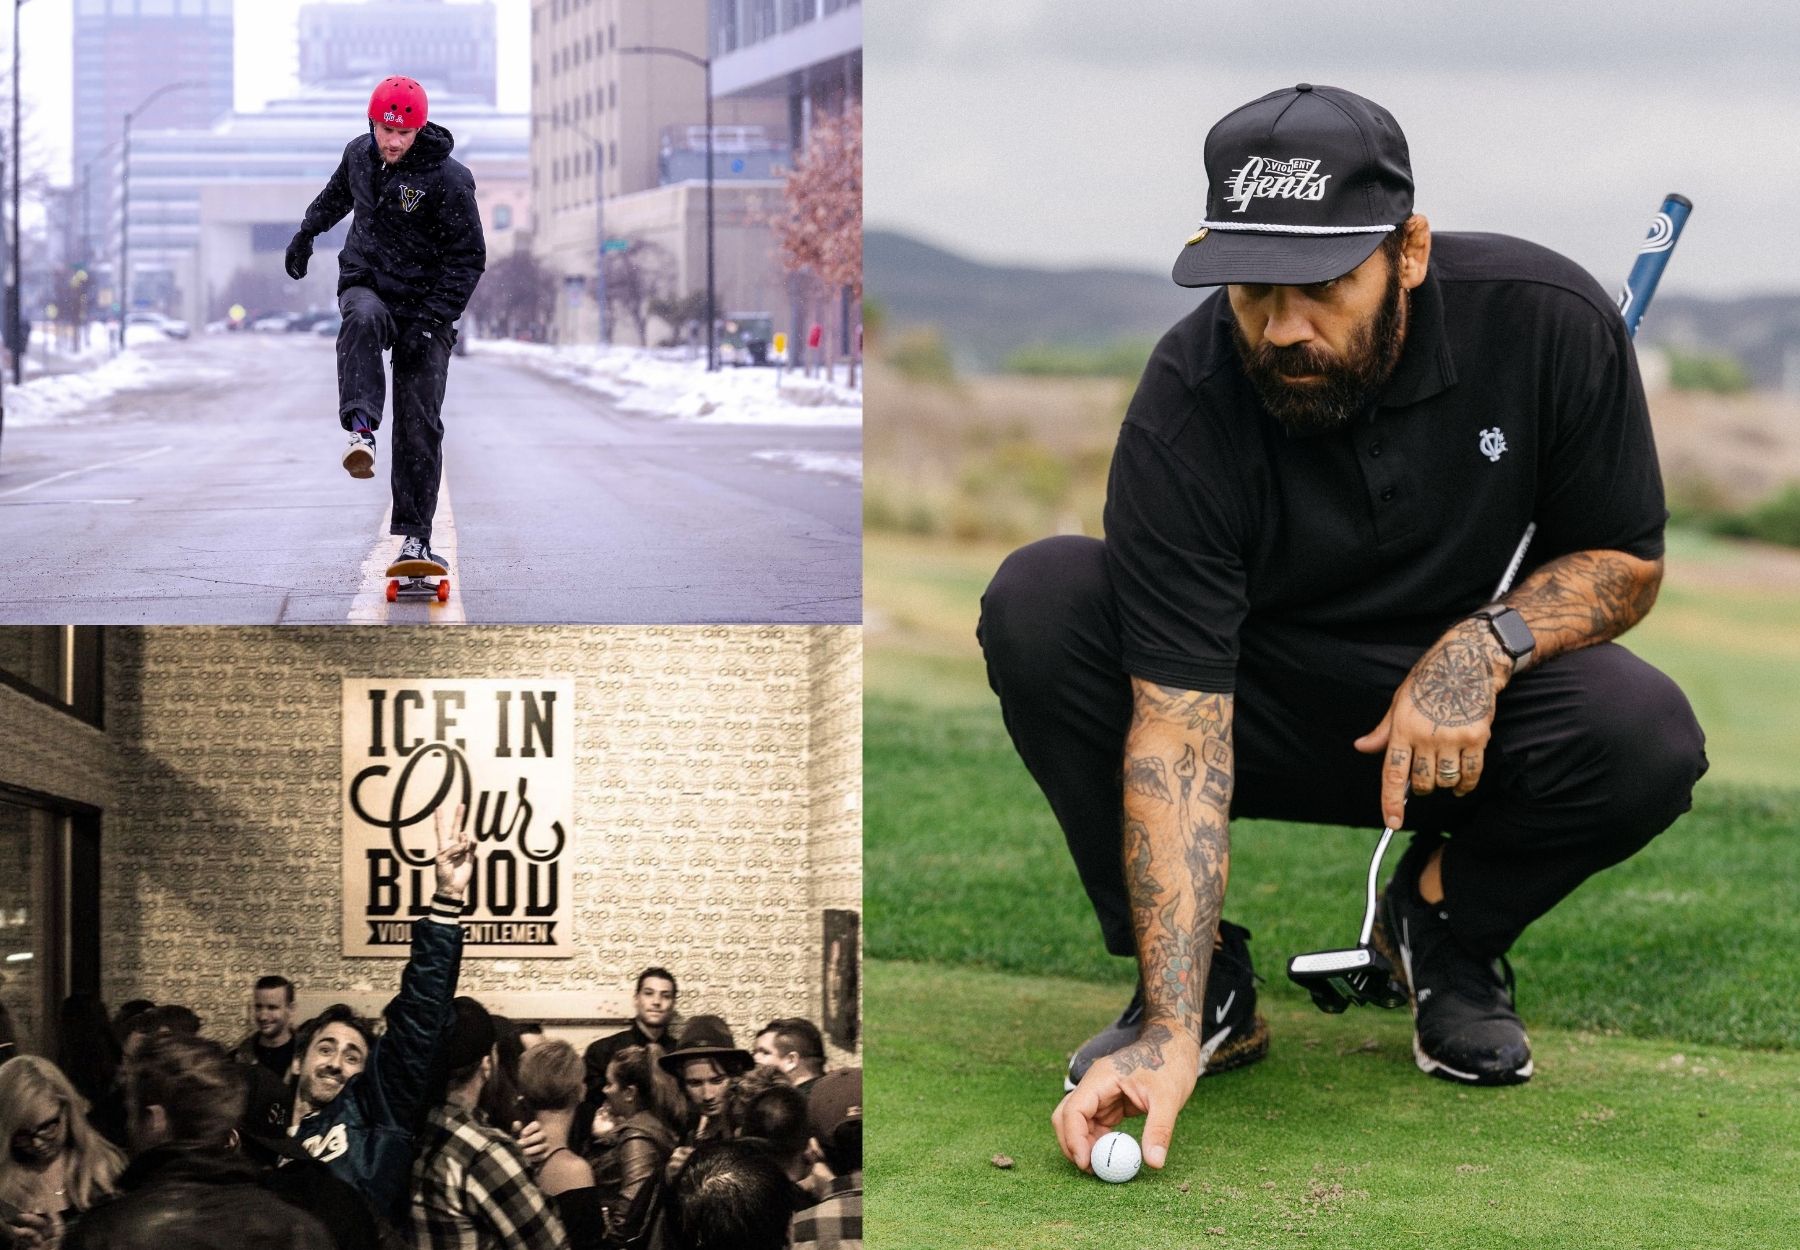 Don't miss fun partnerships, such as the Orquest aedelweiss x Mike Vallely, the Tim Hendrick/VGHC event or their new golf line.